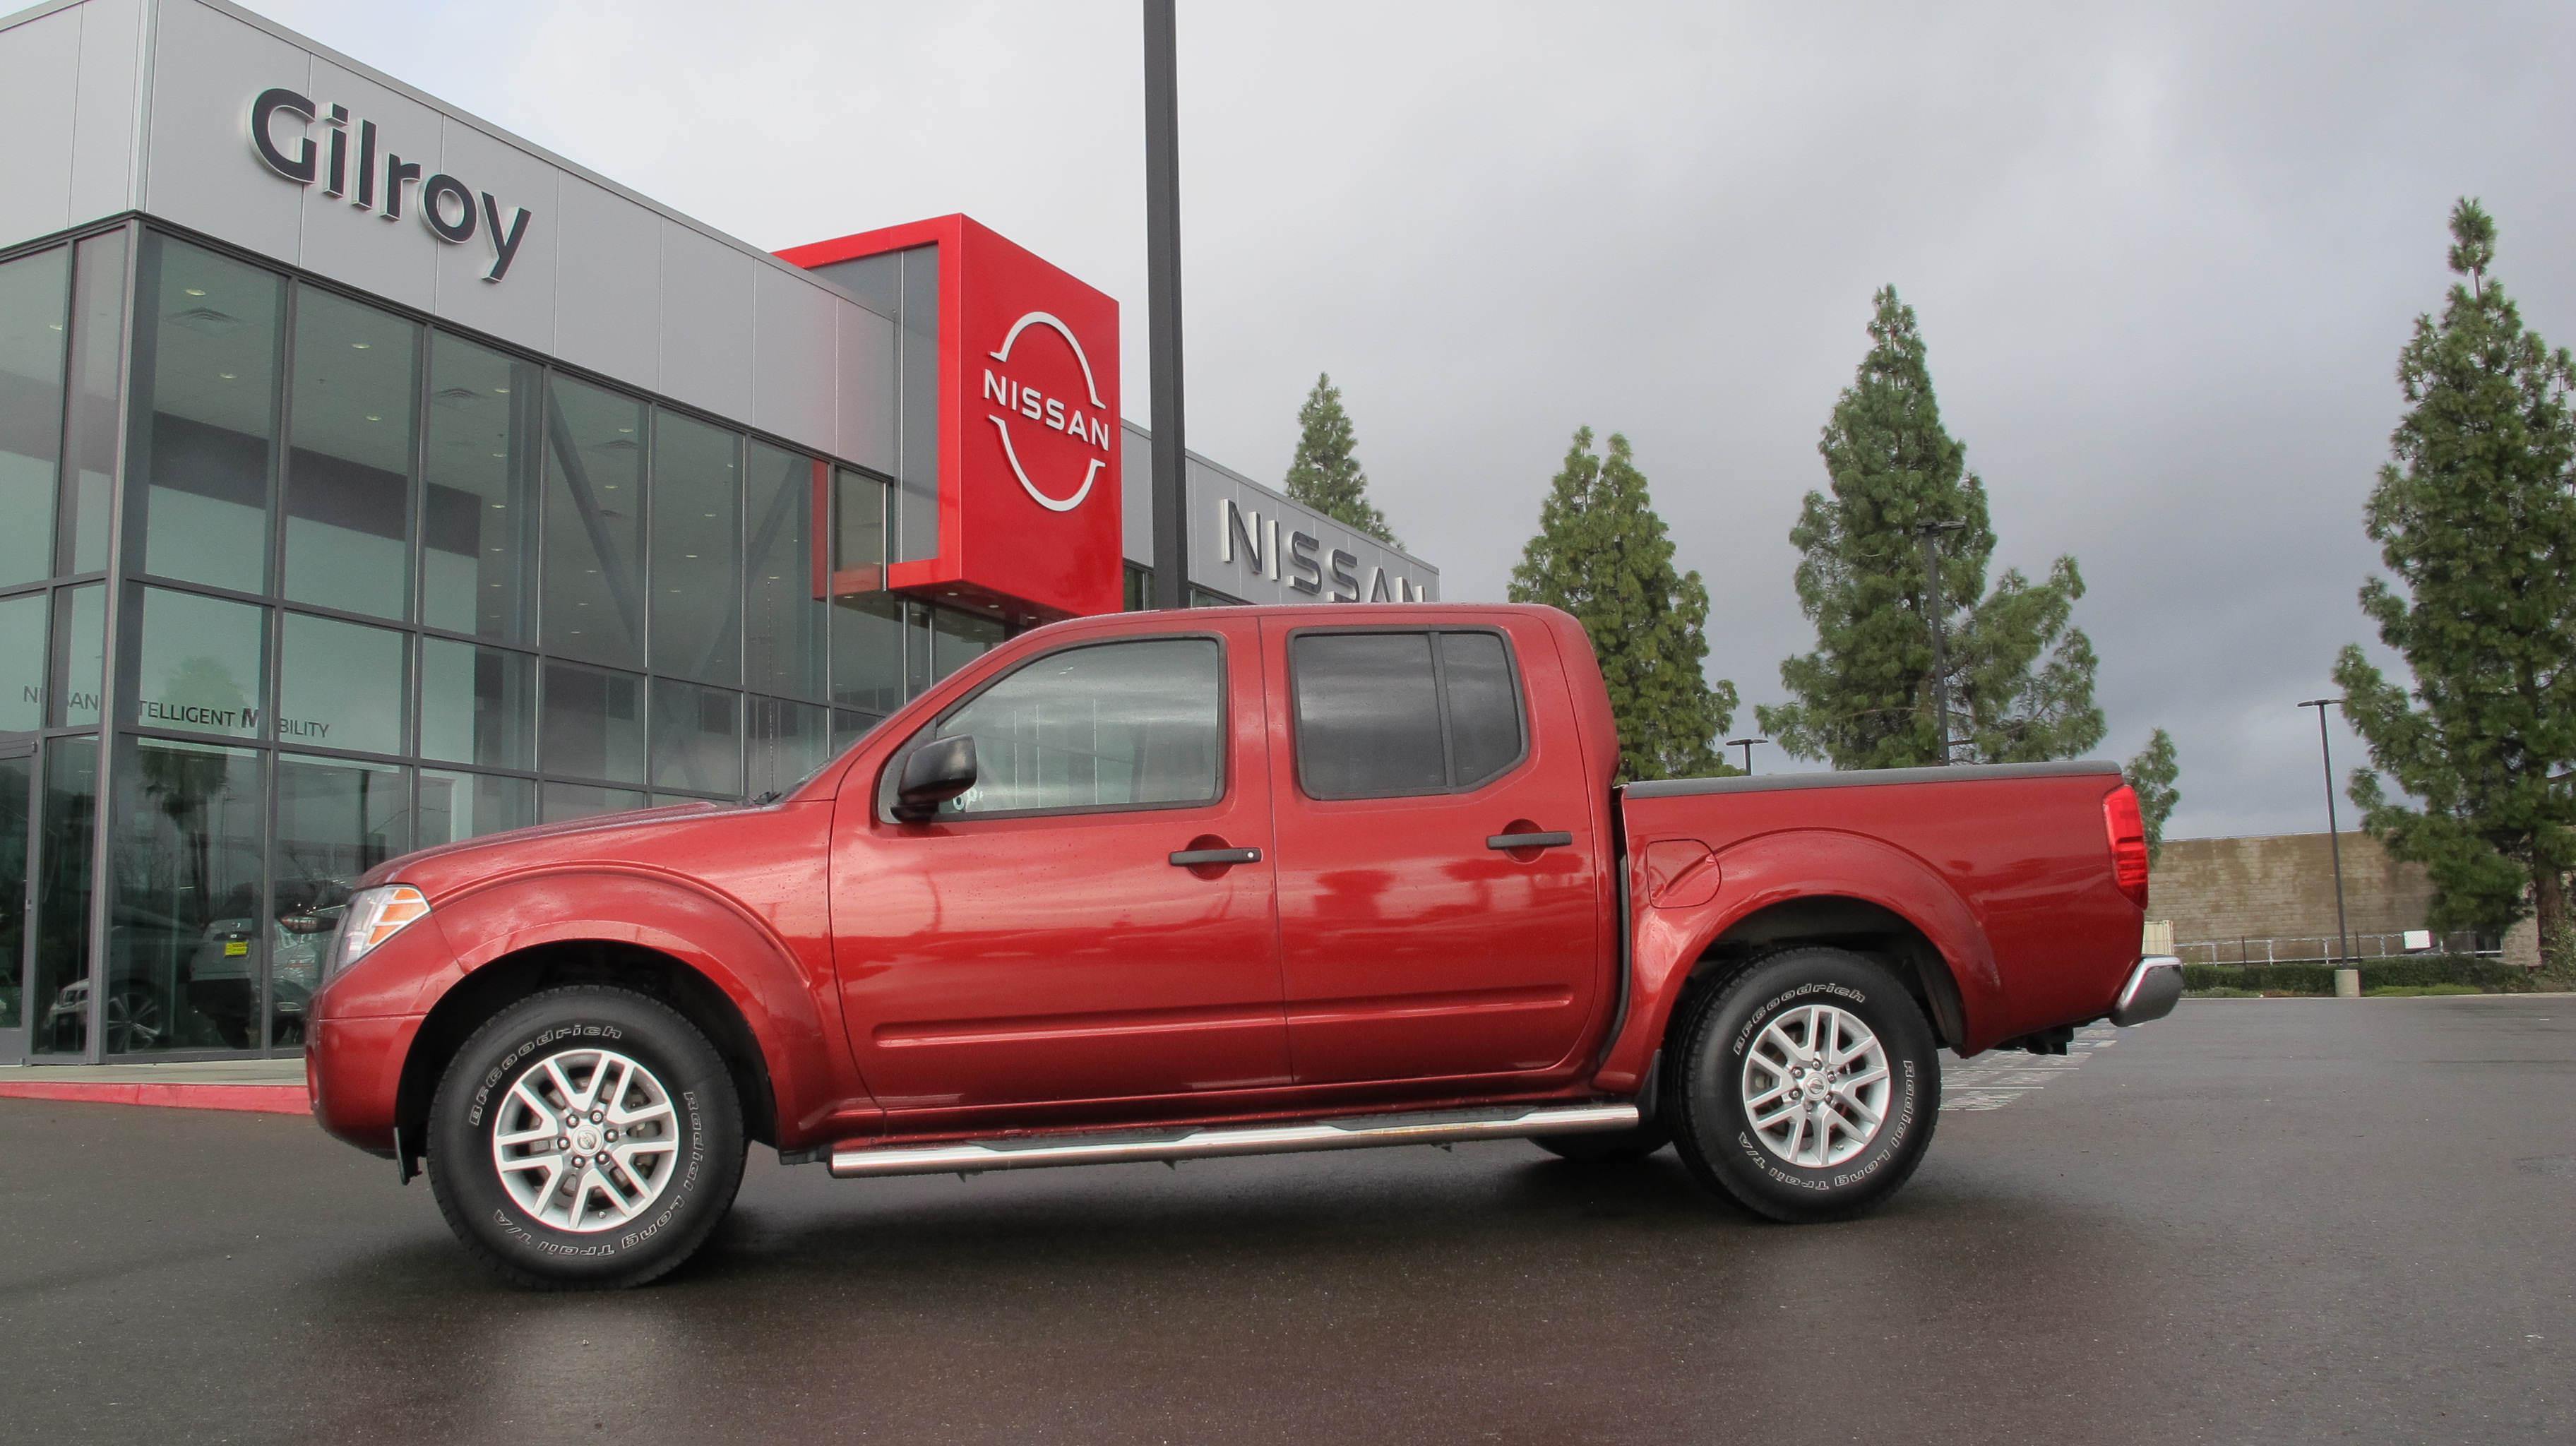 2014 Nissan Frontier 2WD Crew Cab SWB Manual SV